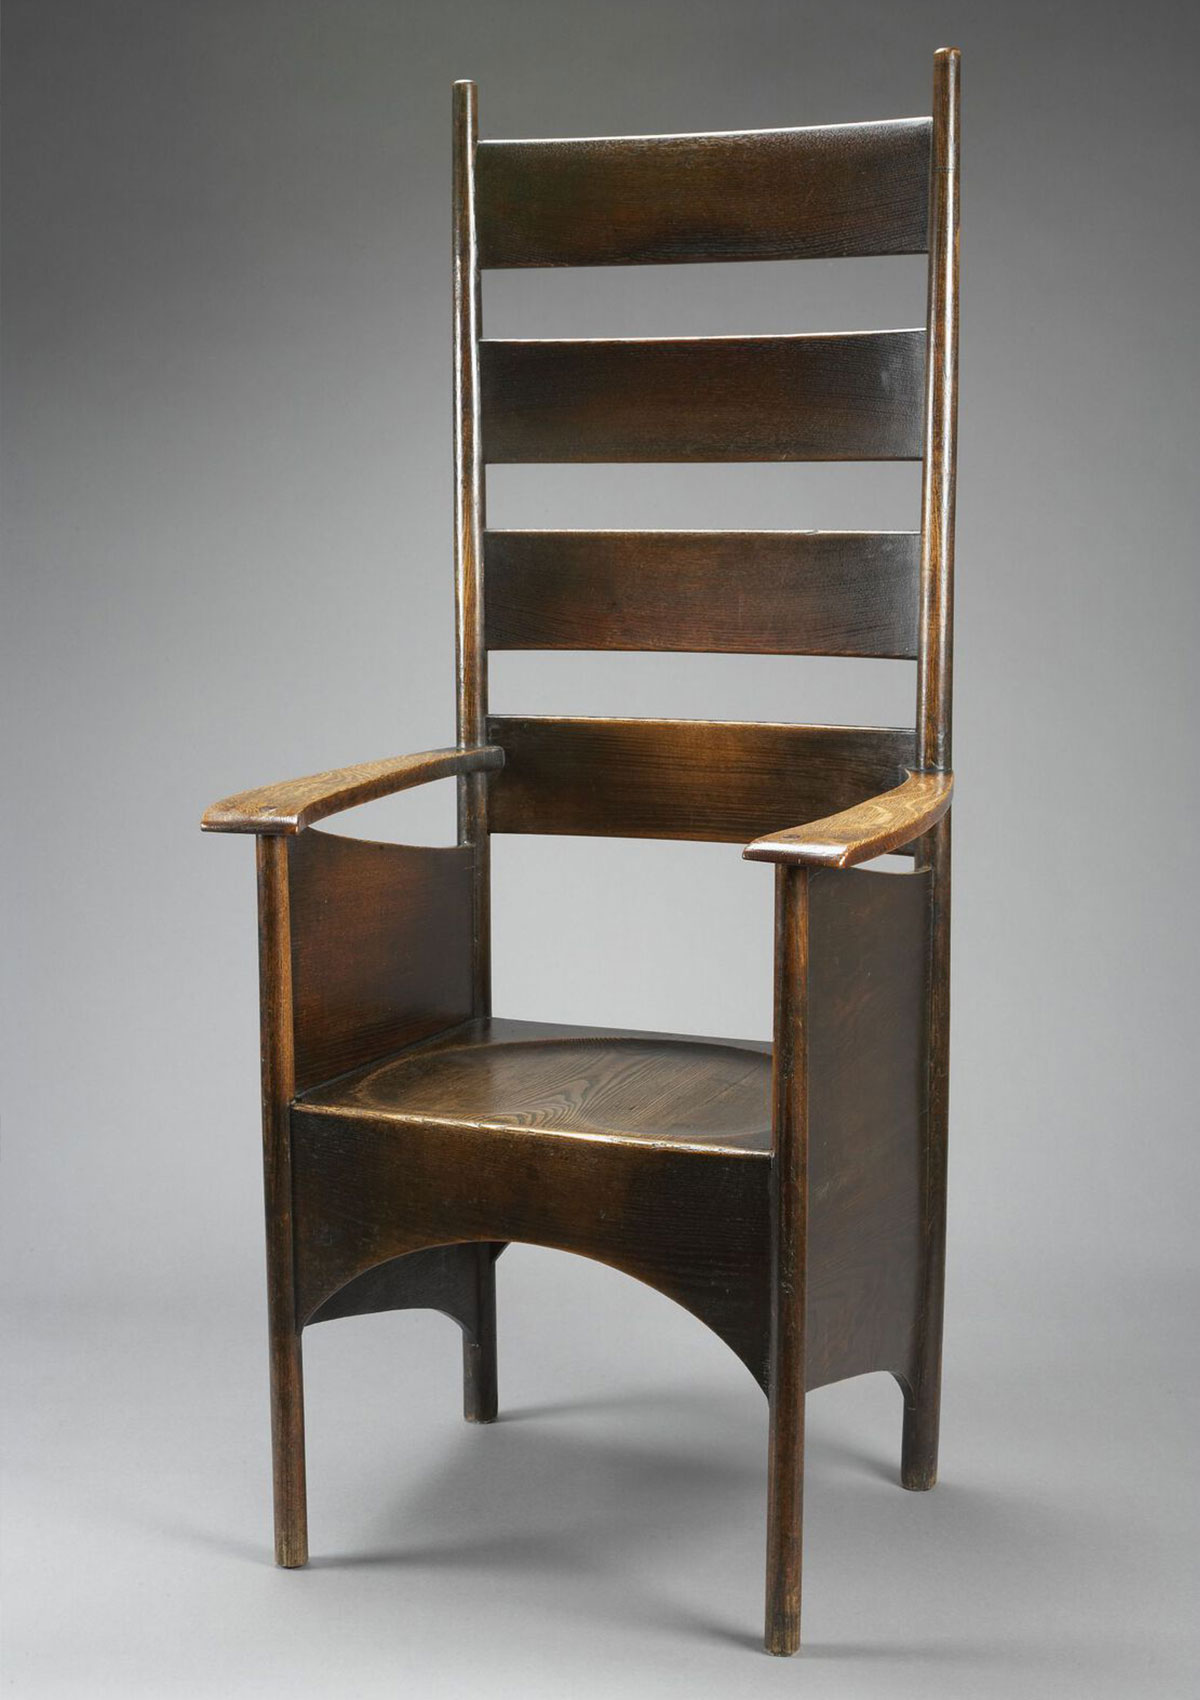 A tall, wooden chair with a high back comprised of four slats. Its narrow arms that connect to the seat with wide panels